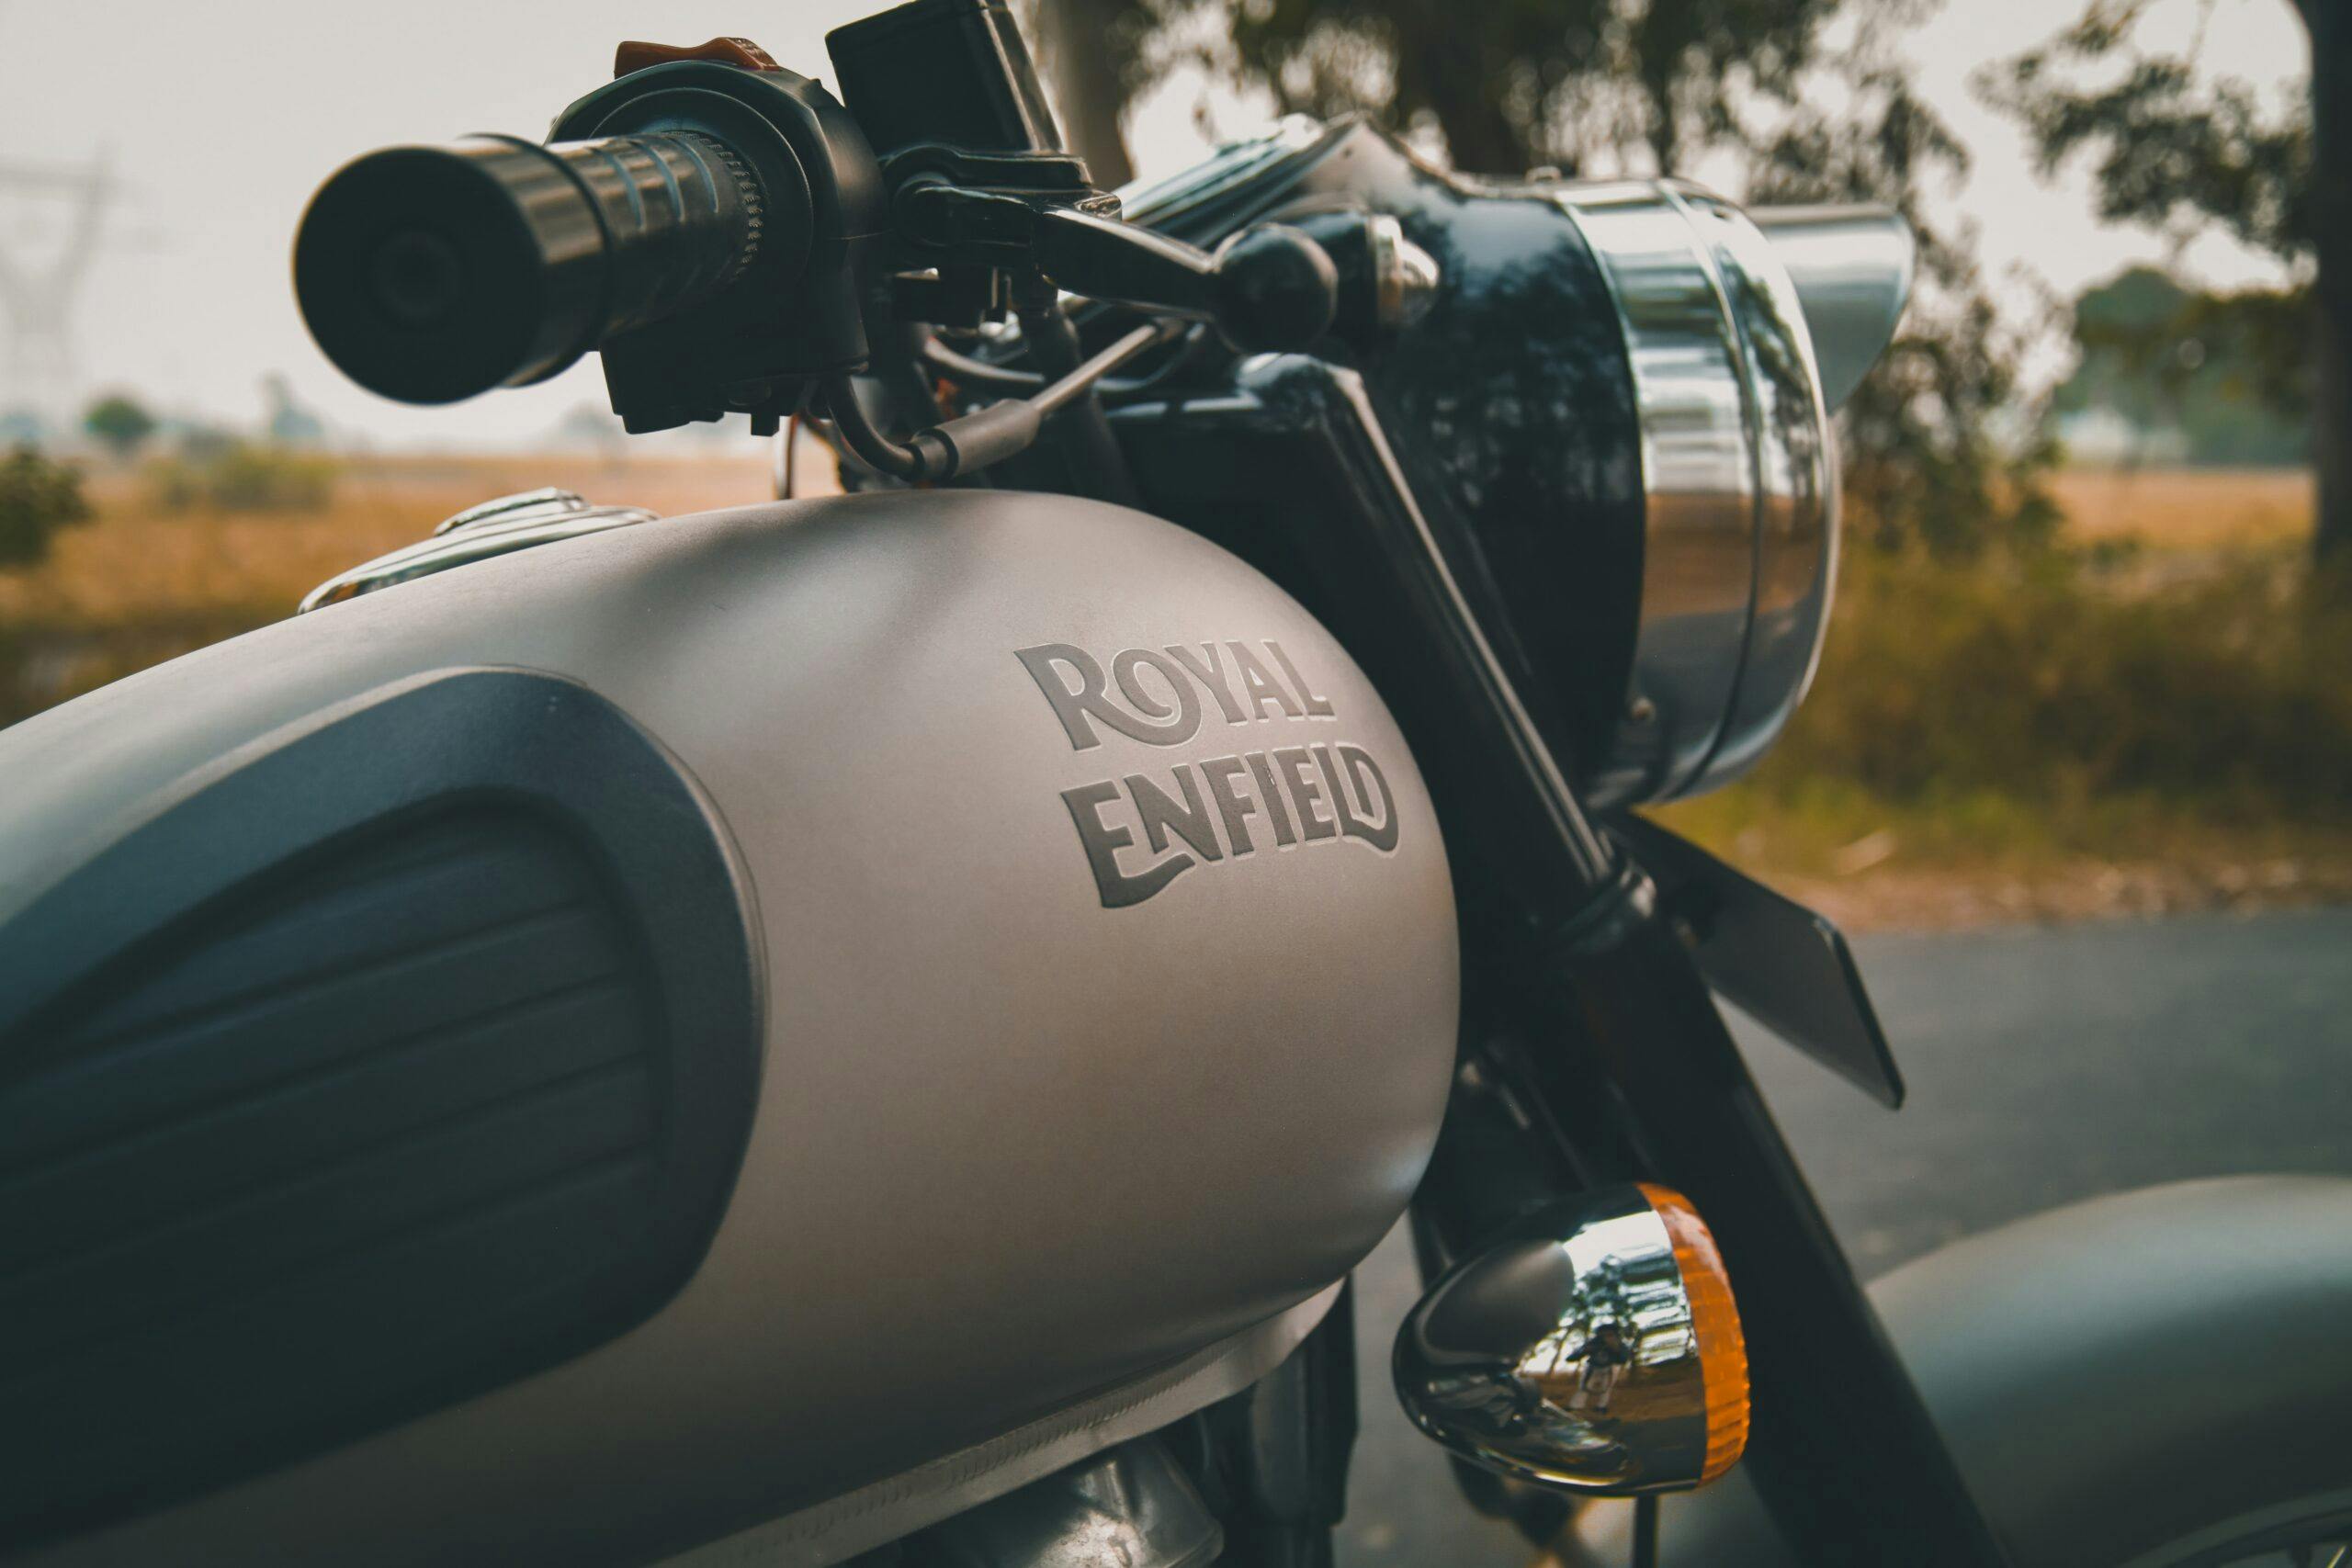 Royal Enfield Motorcycle Rentals: 5 Reasons Why You Should Try Them?